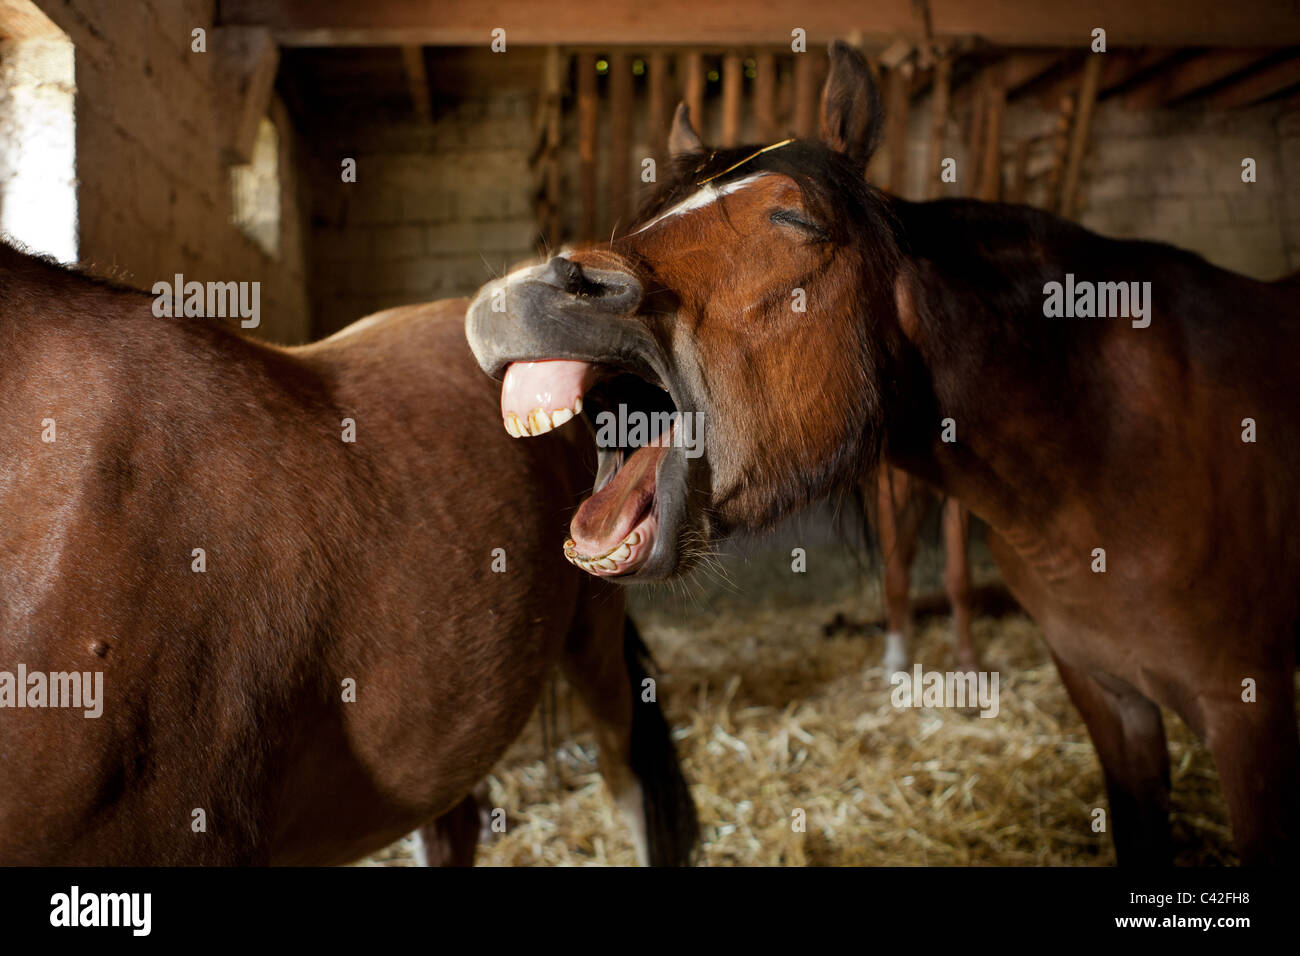 A horse snorts and laughs Stock Photo